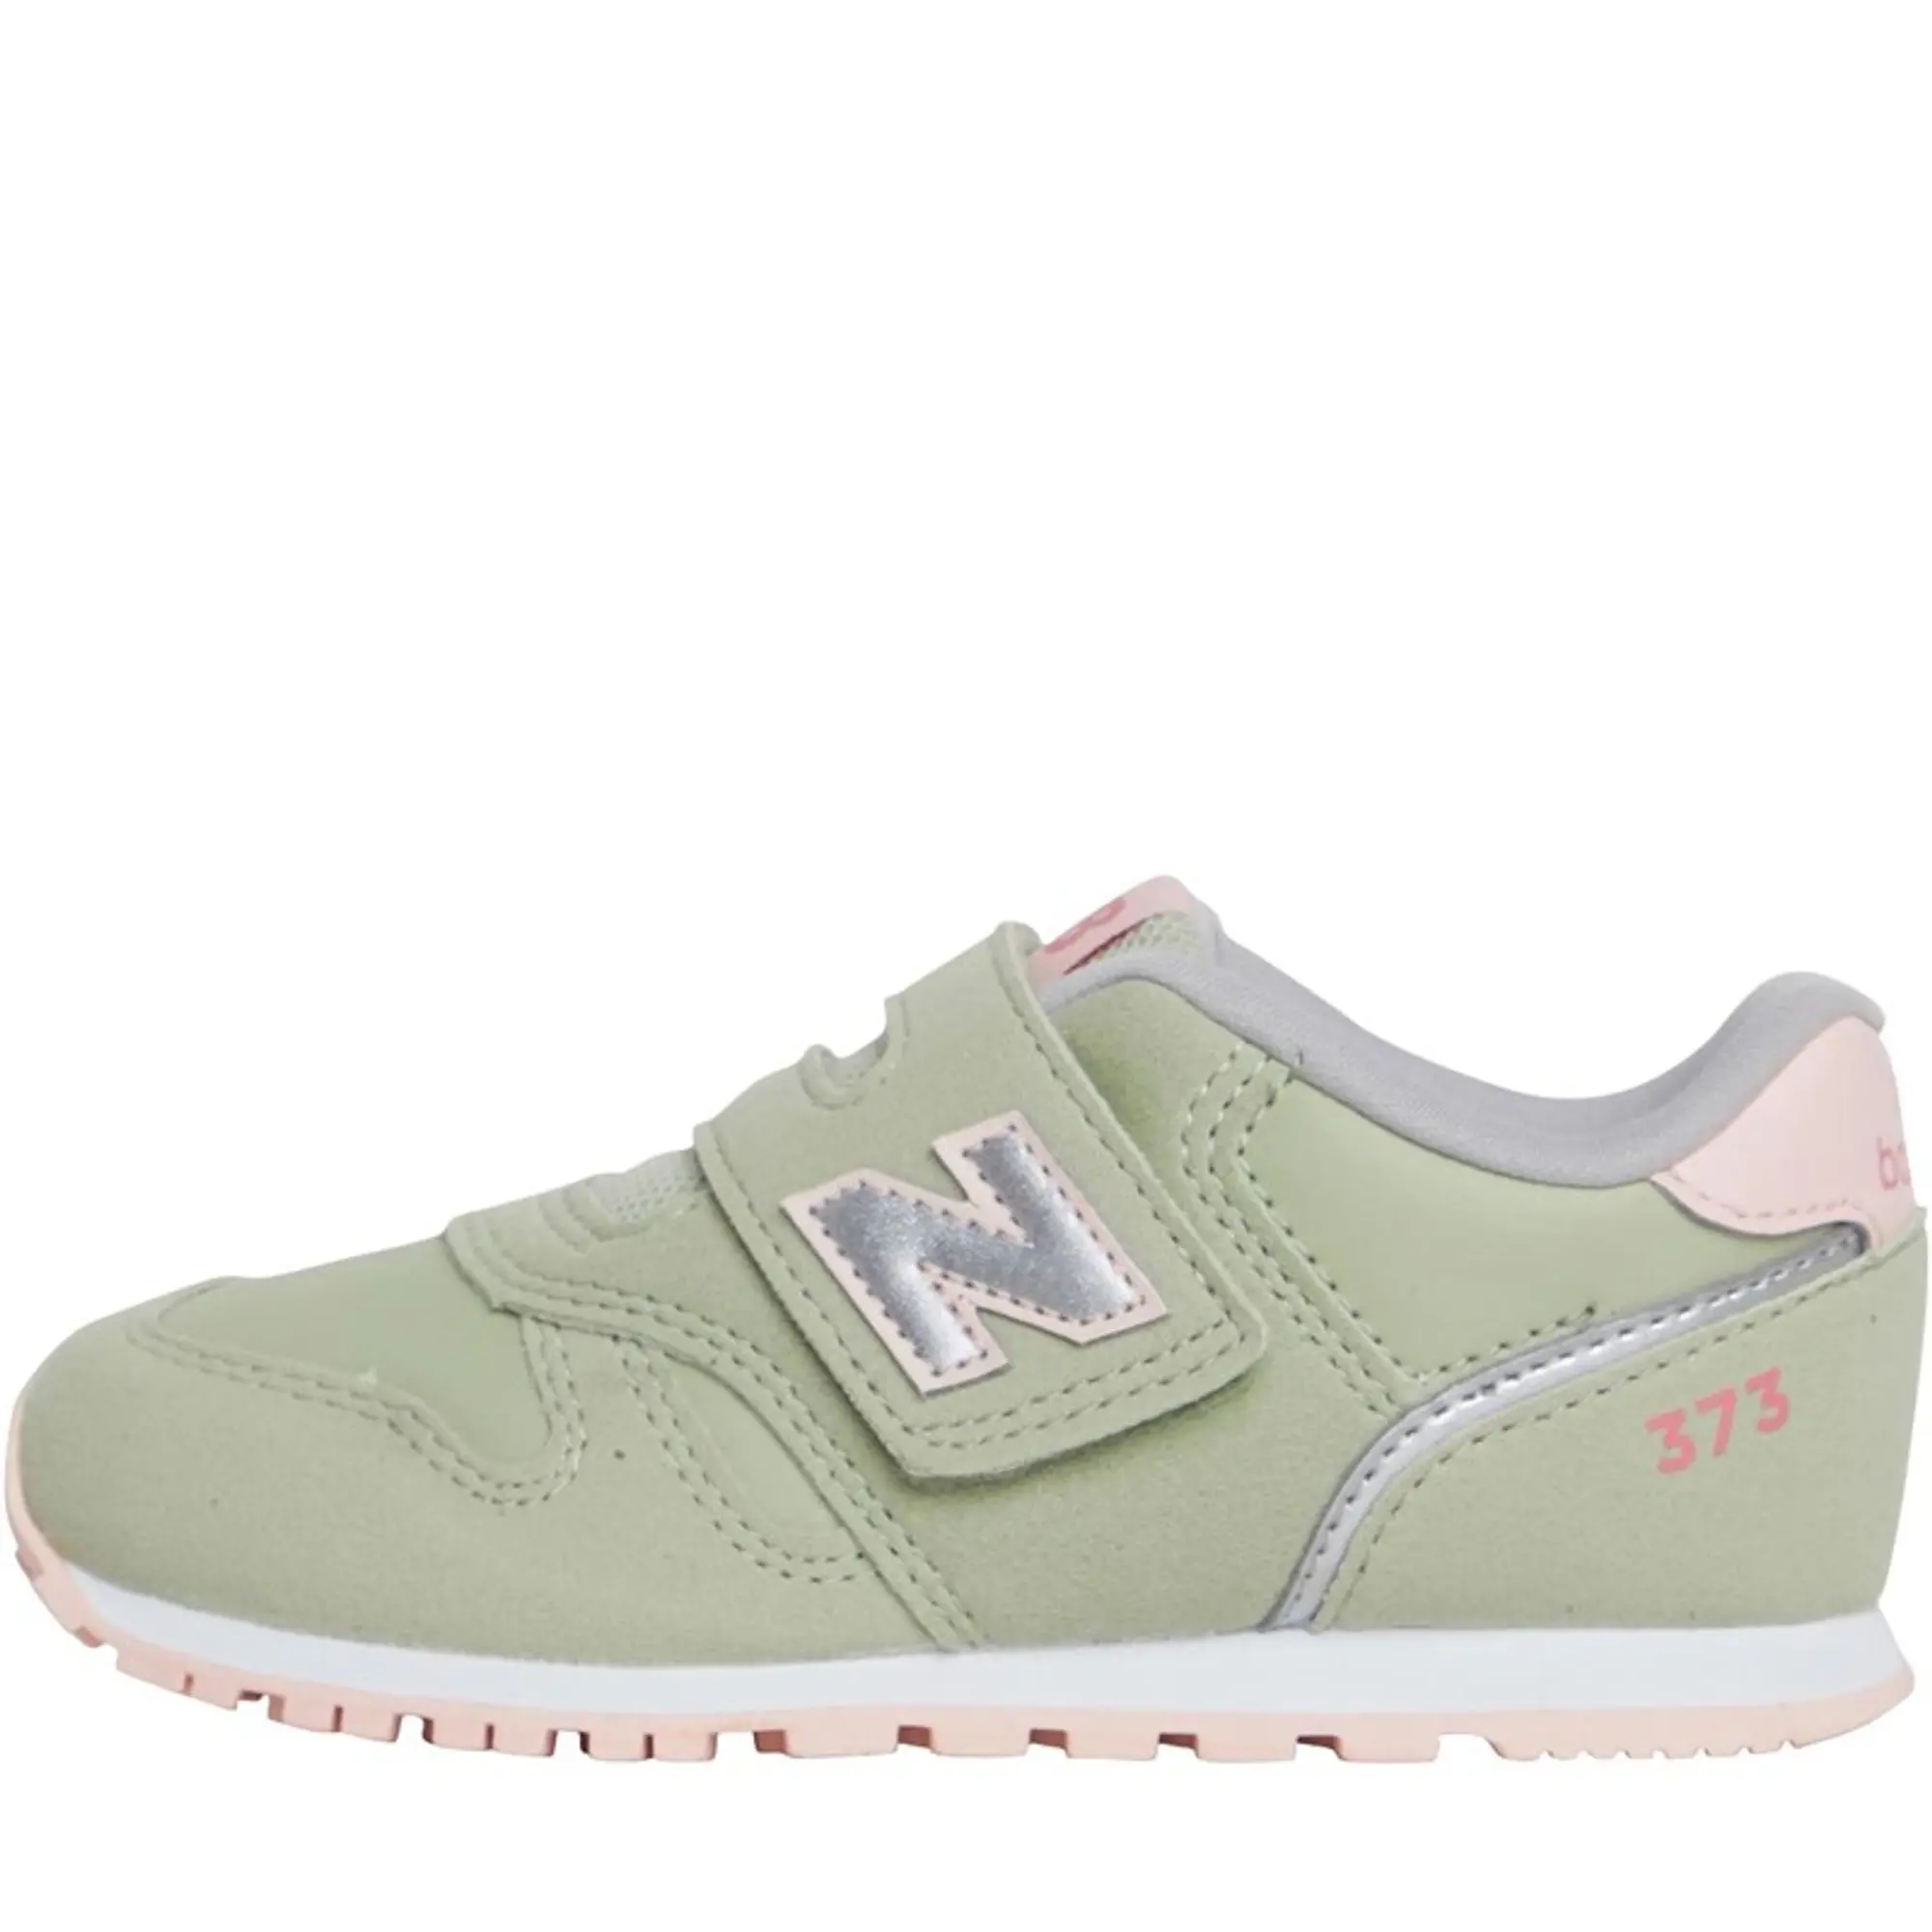 New Balance Infant Girls Wide Fit 373 Trainers Light Olive